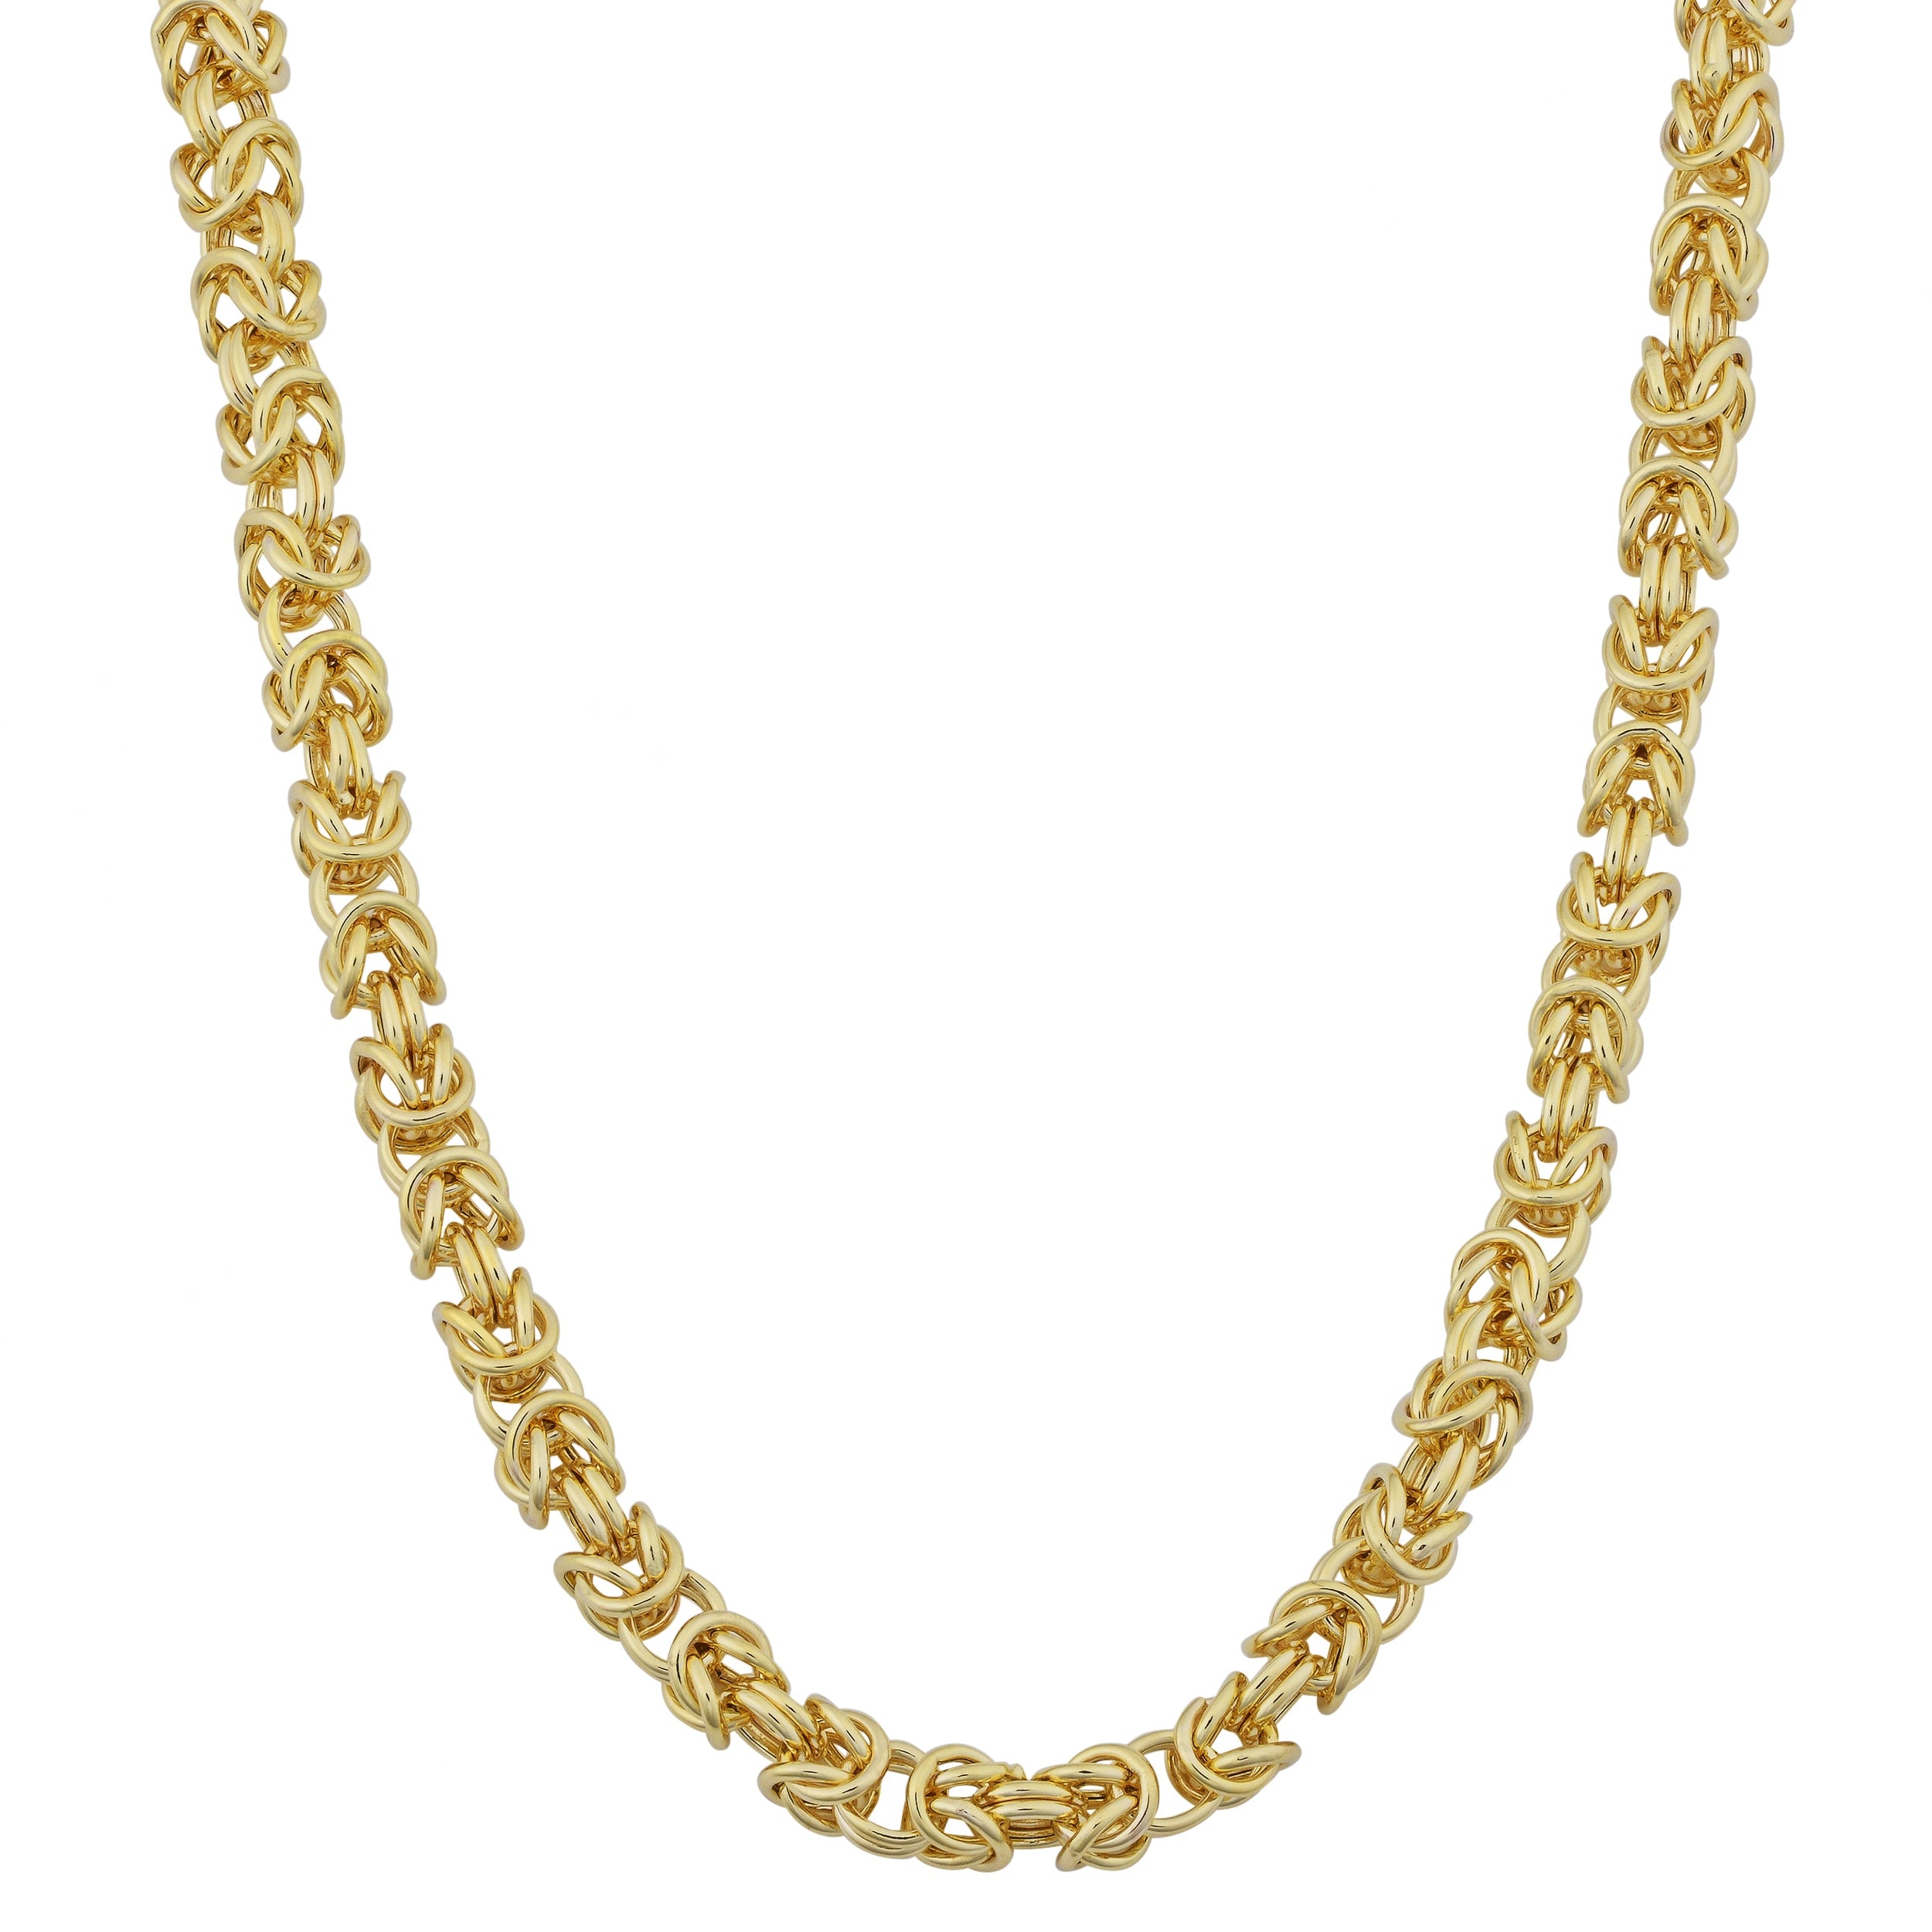 Fremada 10k Yellow Gold 3.6-mm High Polish Square Byzantine Necklace (18 or 20 inches)